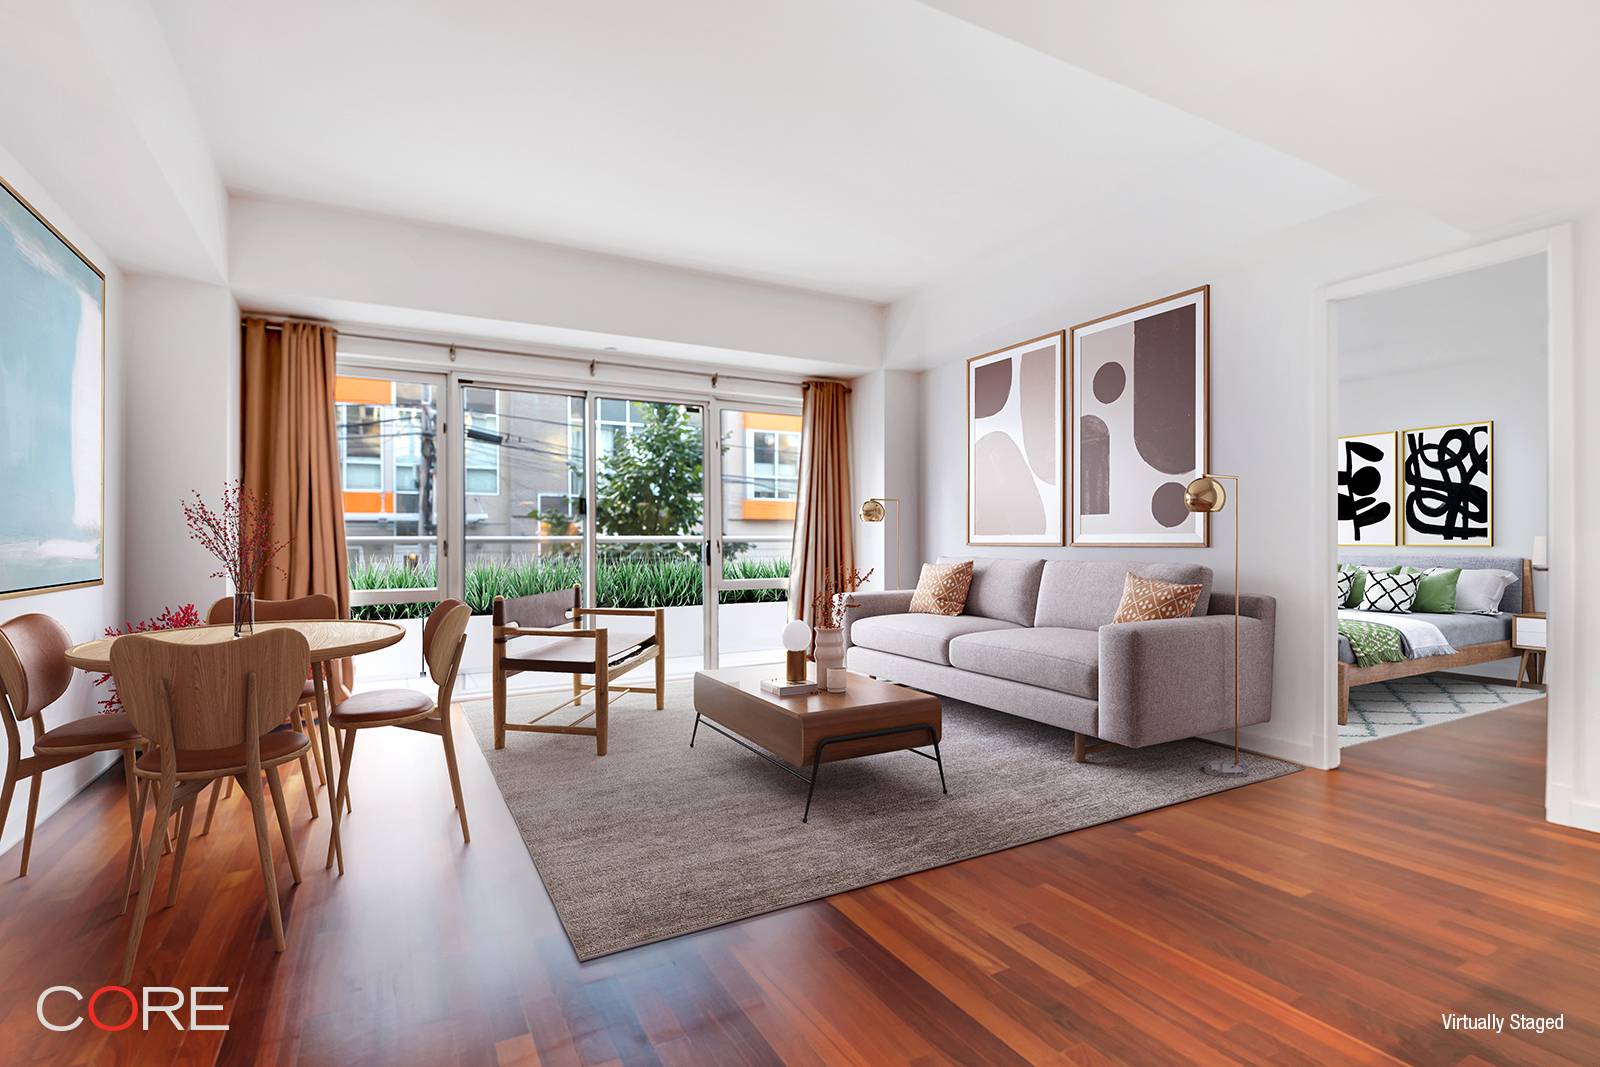 A terrace lover's dream. This garden apartment at 125 North 10th Street stands apart from all other two bedrooms on the market with a private 200 square foot terrace.